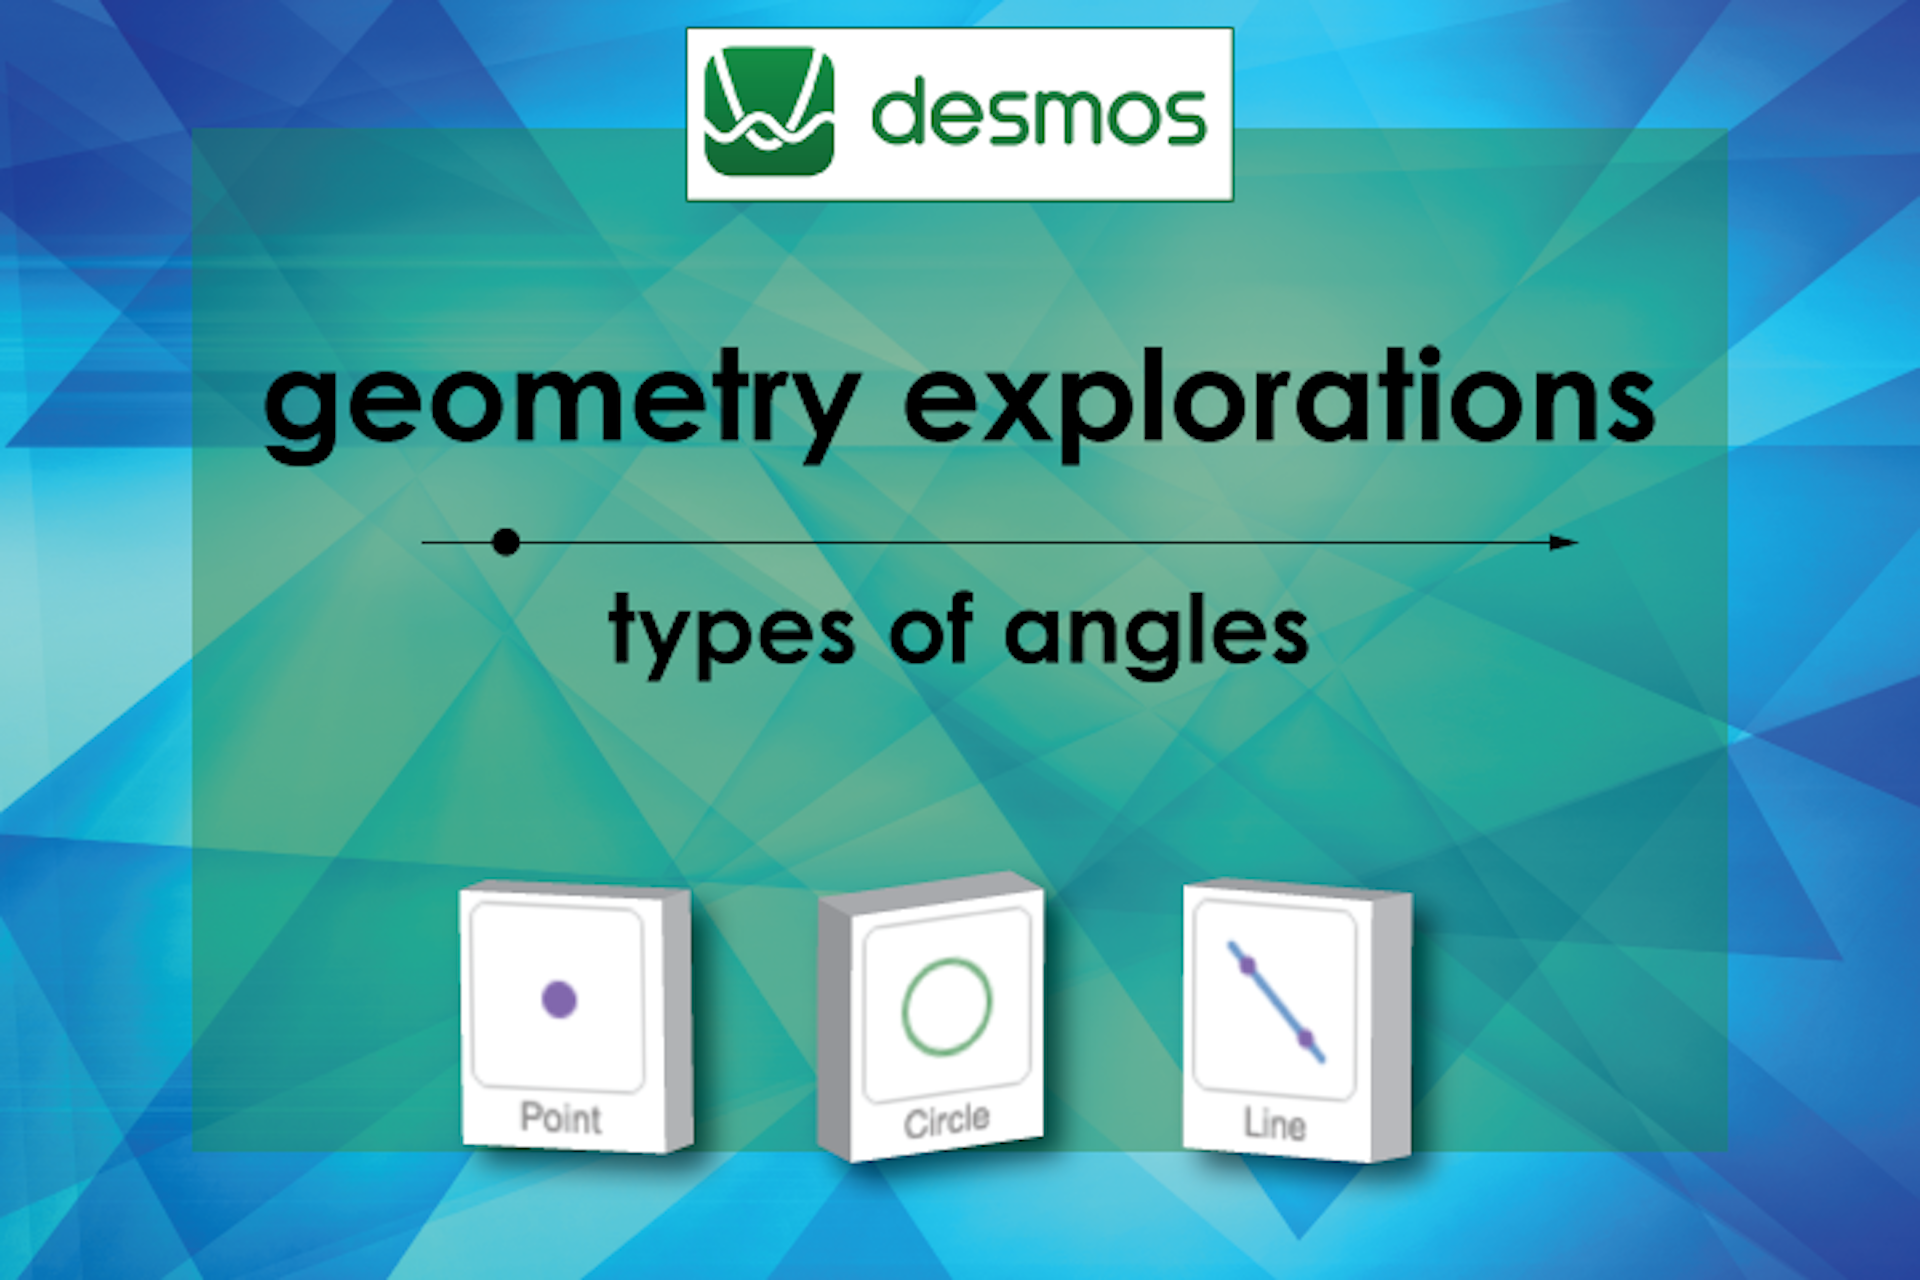 Closed Captioned Video: Desmos Geometry Exploration: Types of Angles I